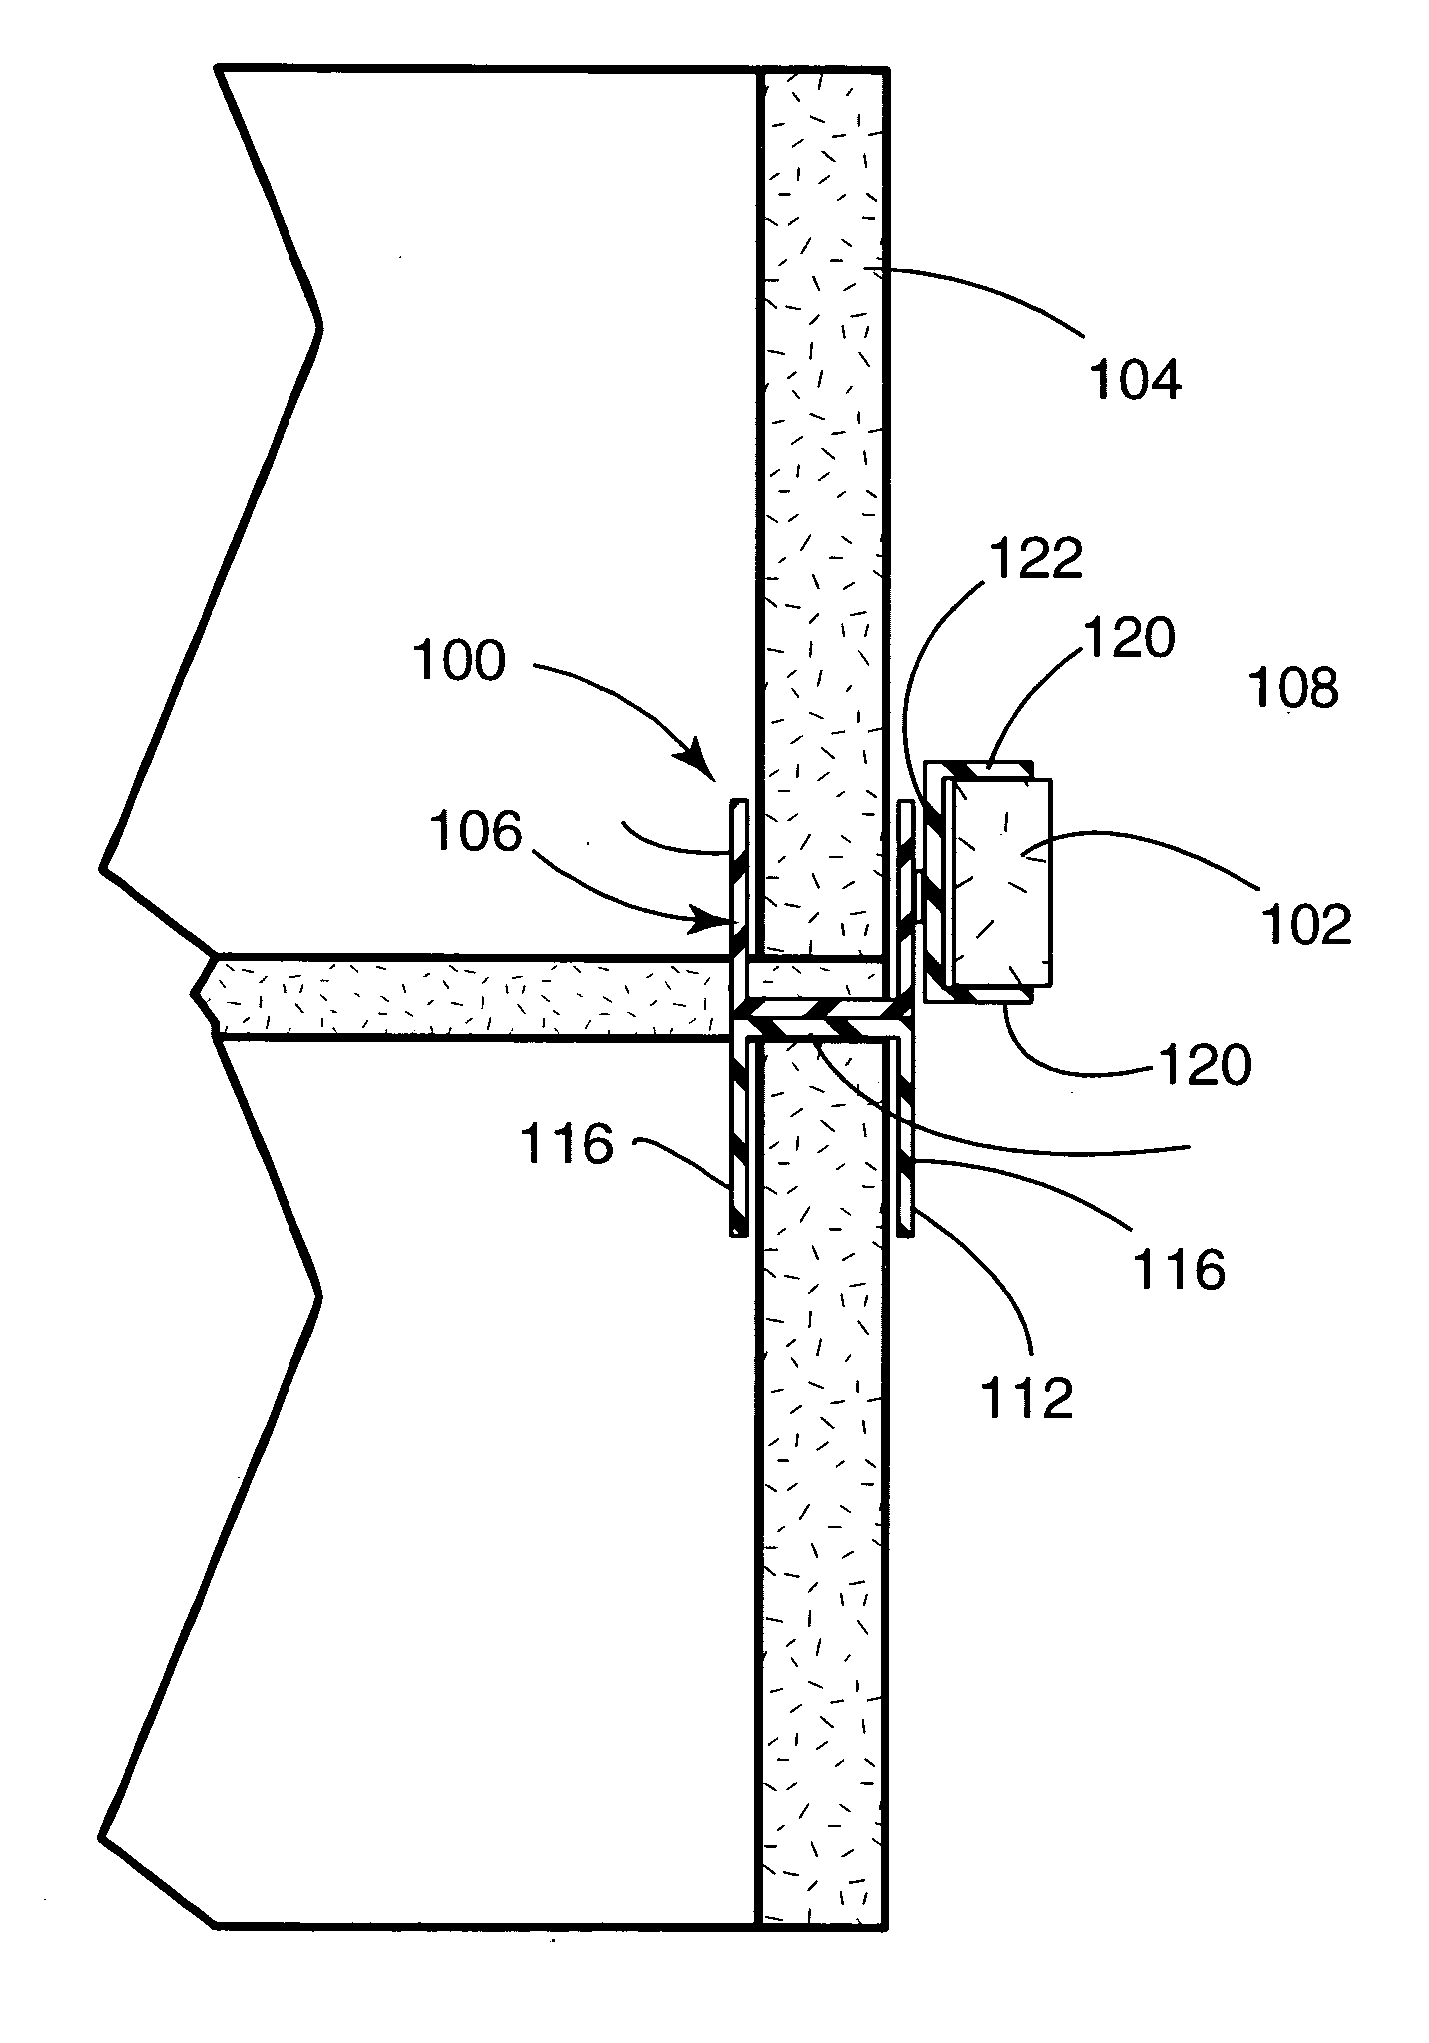 Attachment device for building materials